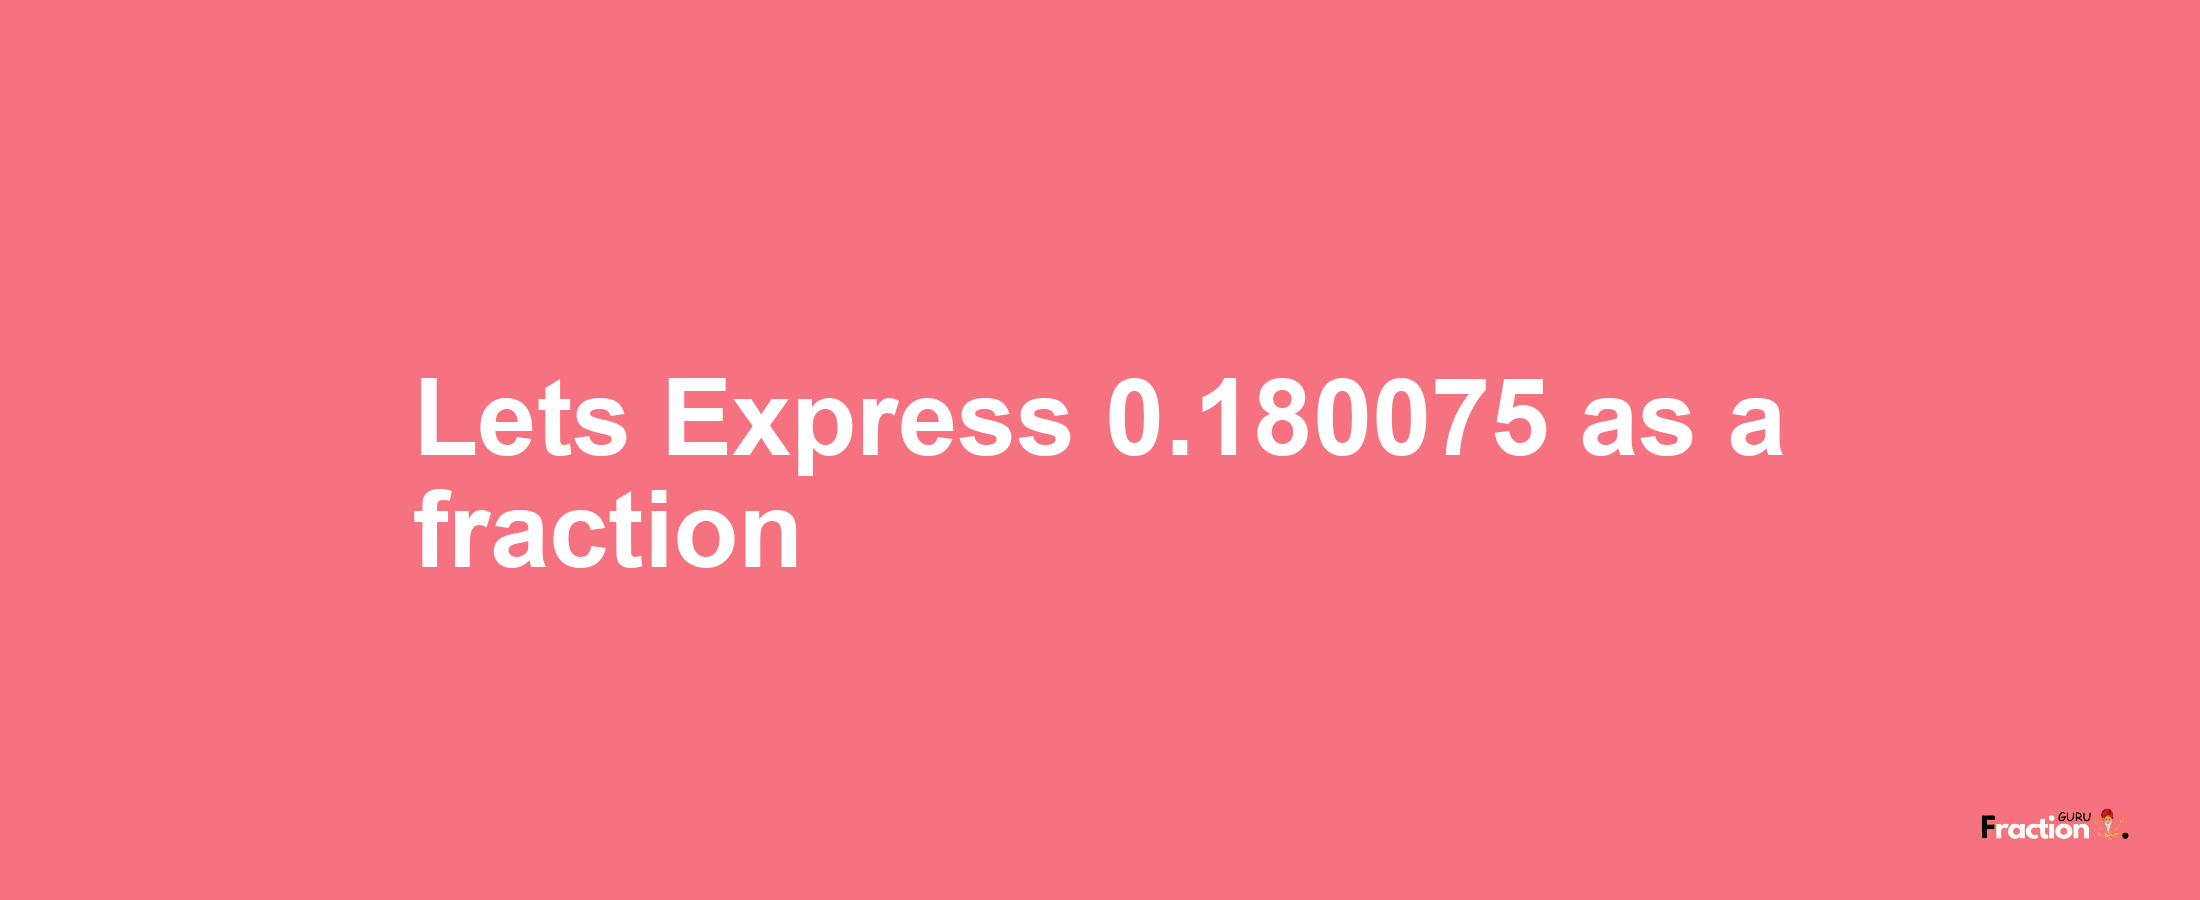 Lets Express 0.180075 as afraction